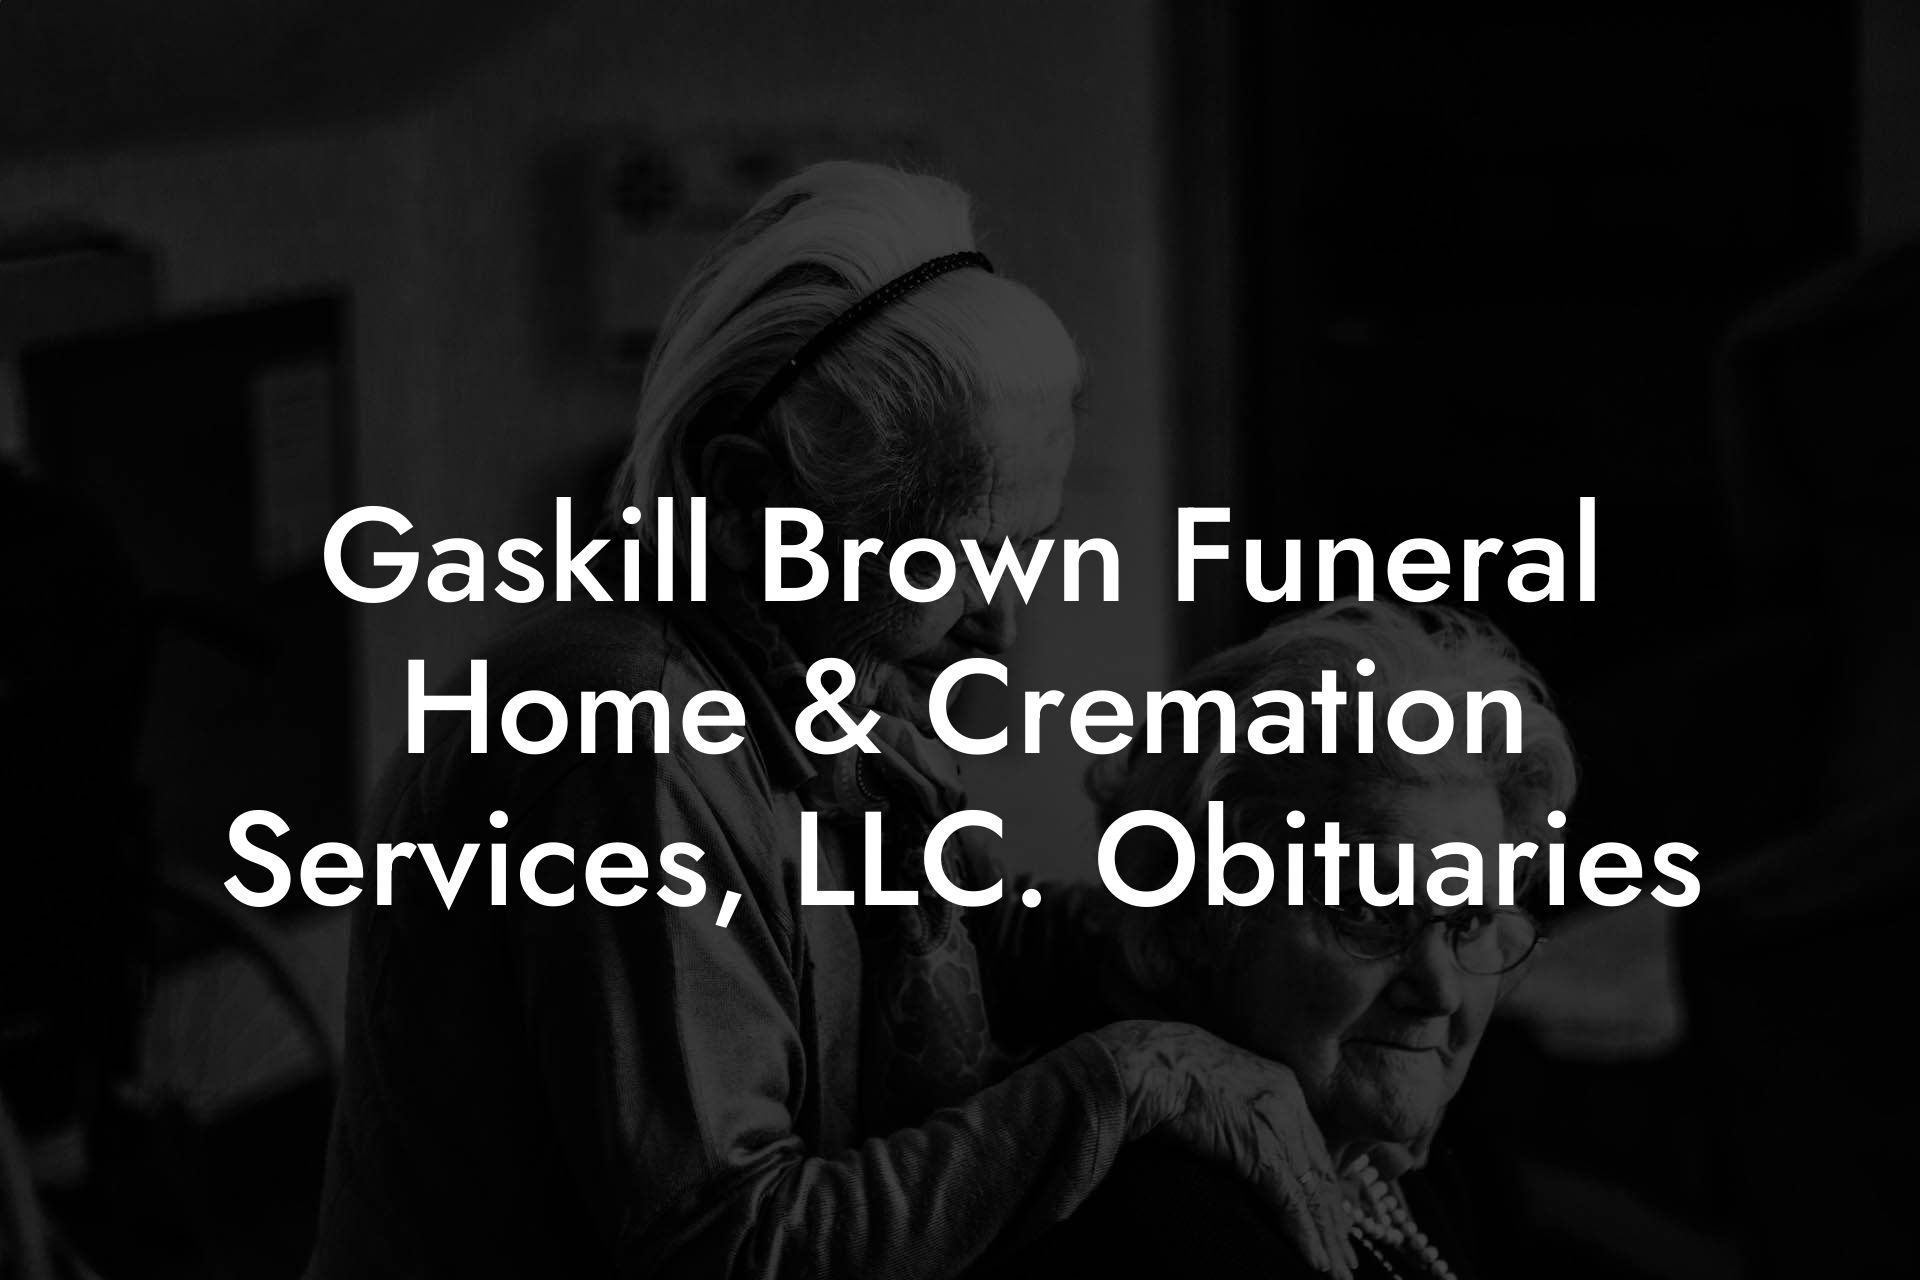 Gaskill Brown Funeral Home & Cremation Services, LLC. Obituaries